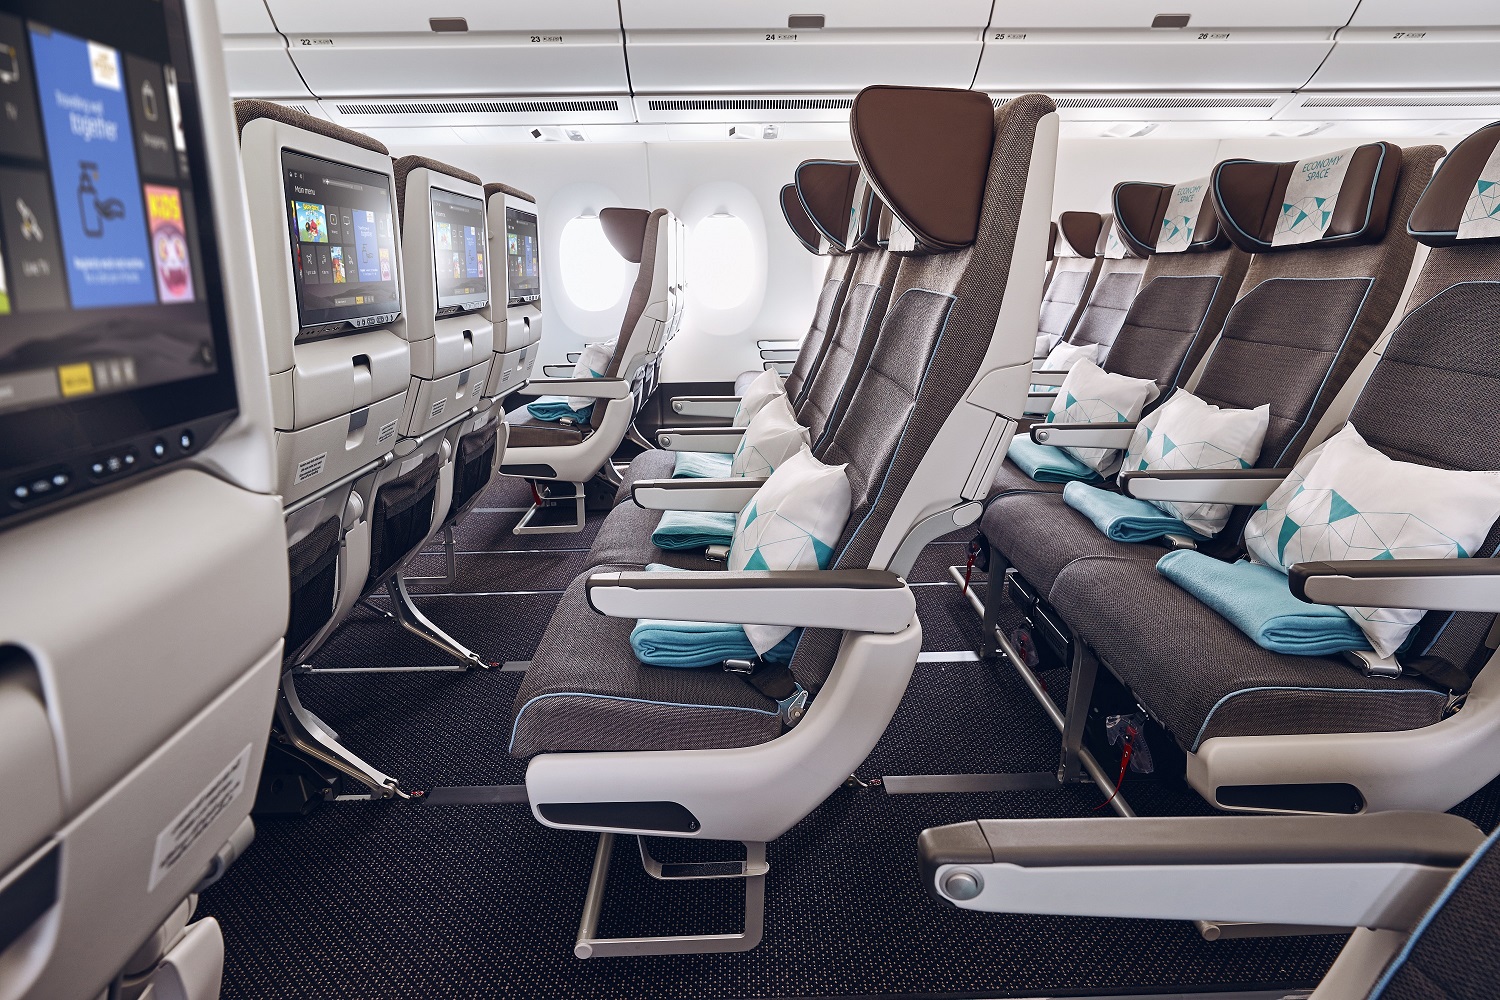 Etihad's Economy Class is configured with 327 seats in a 3-3-3 layout. Click to enlarge.